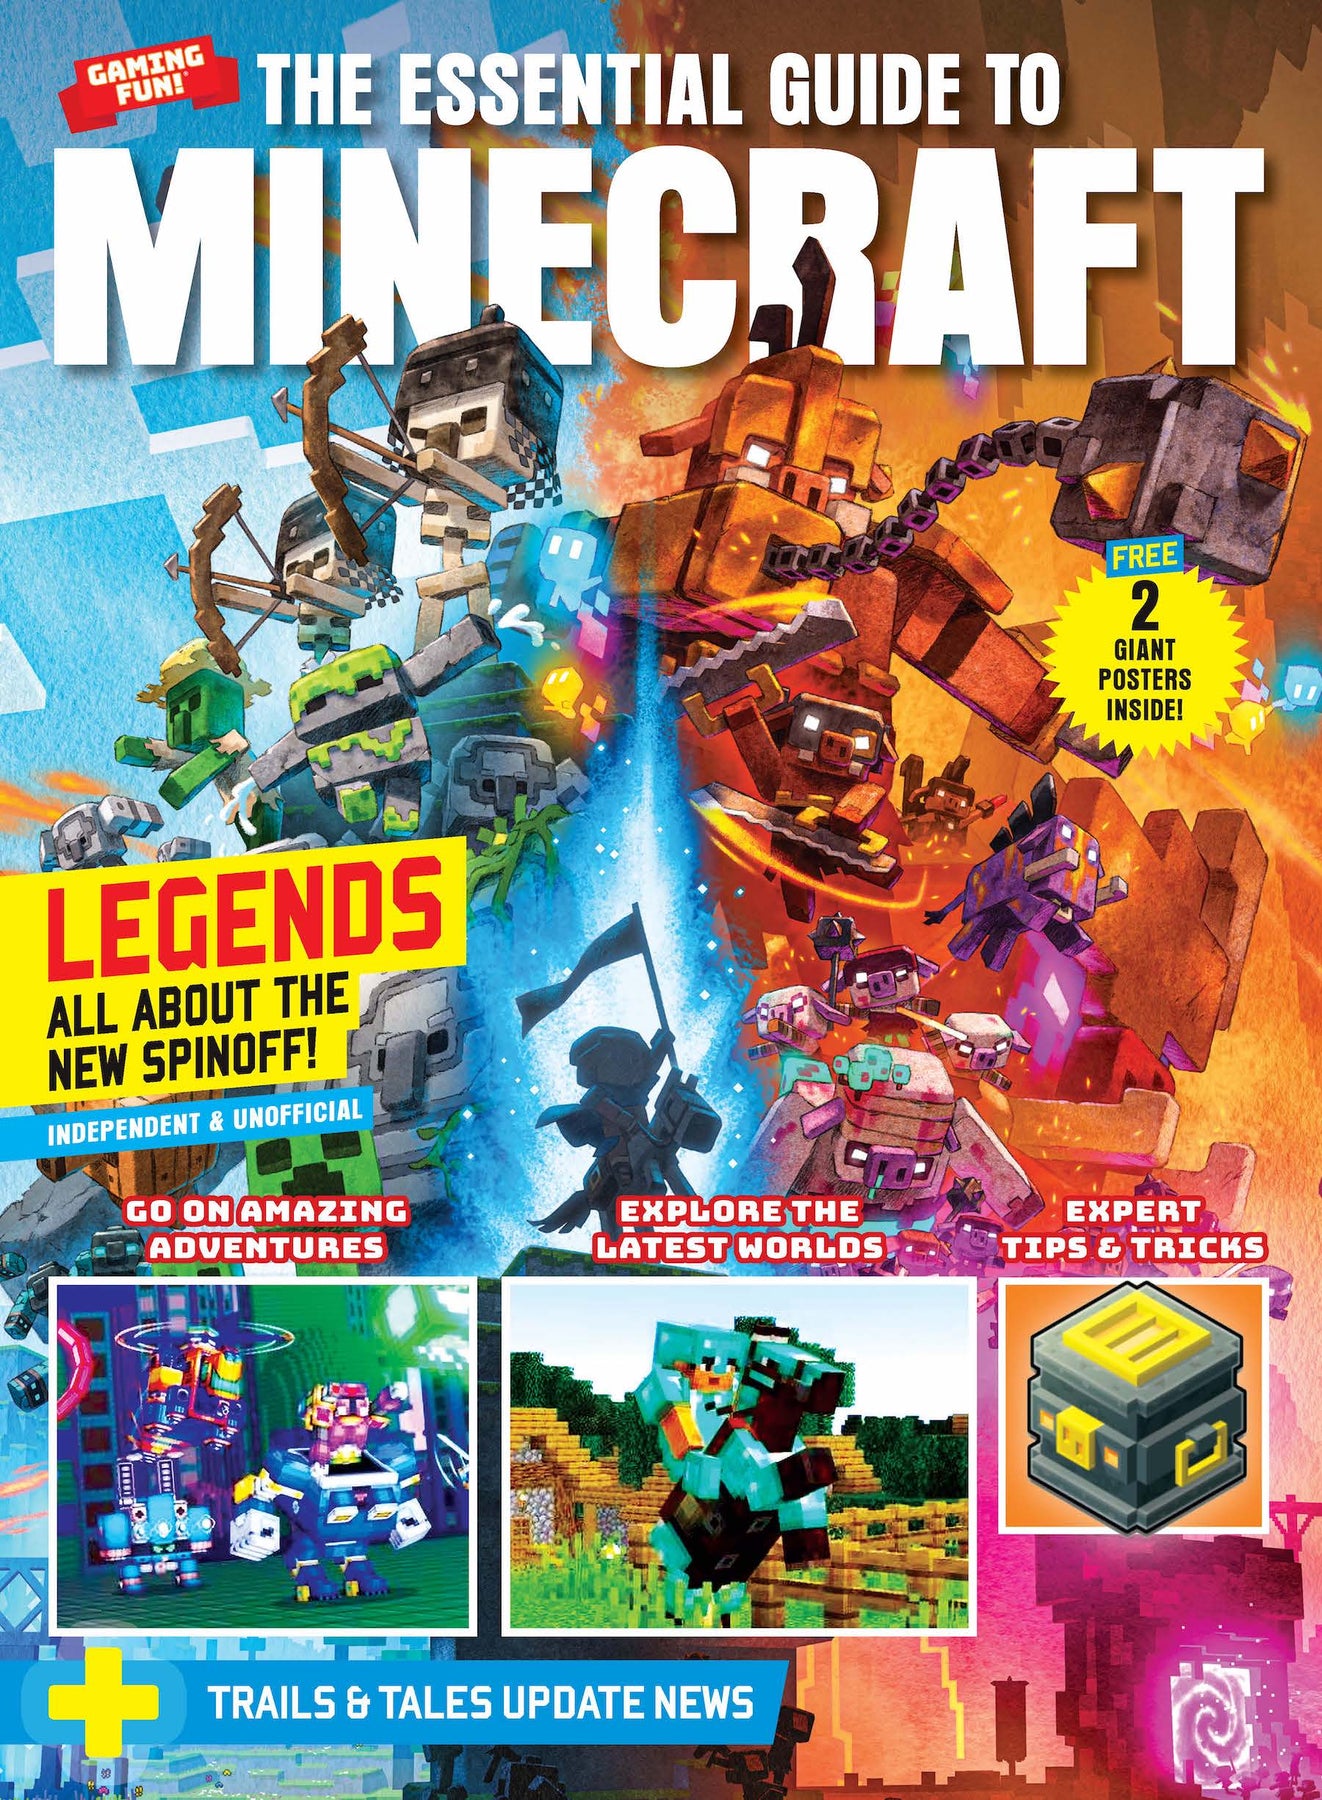 The Ultimate Guide To ROBLOX Magazine Gaming Fun 2 Free Posters